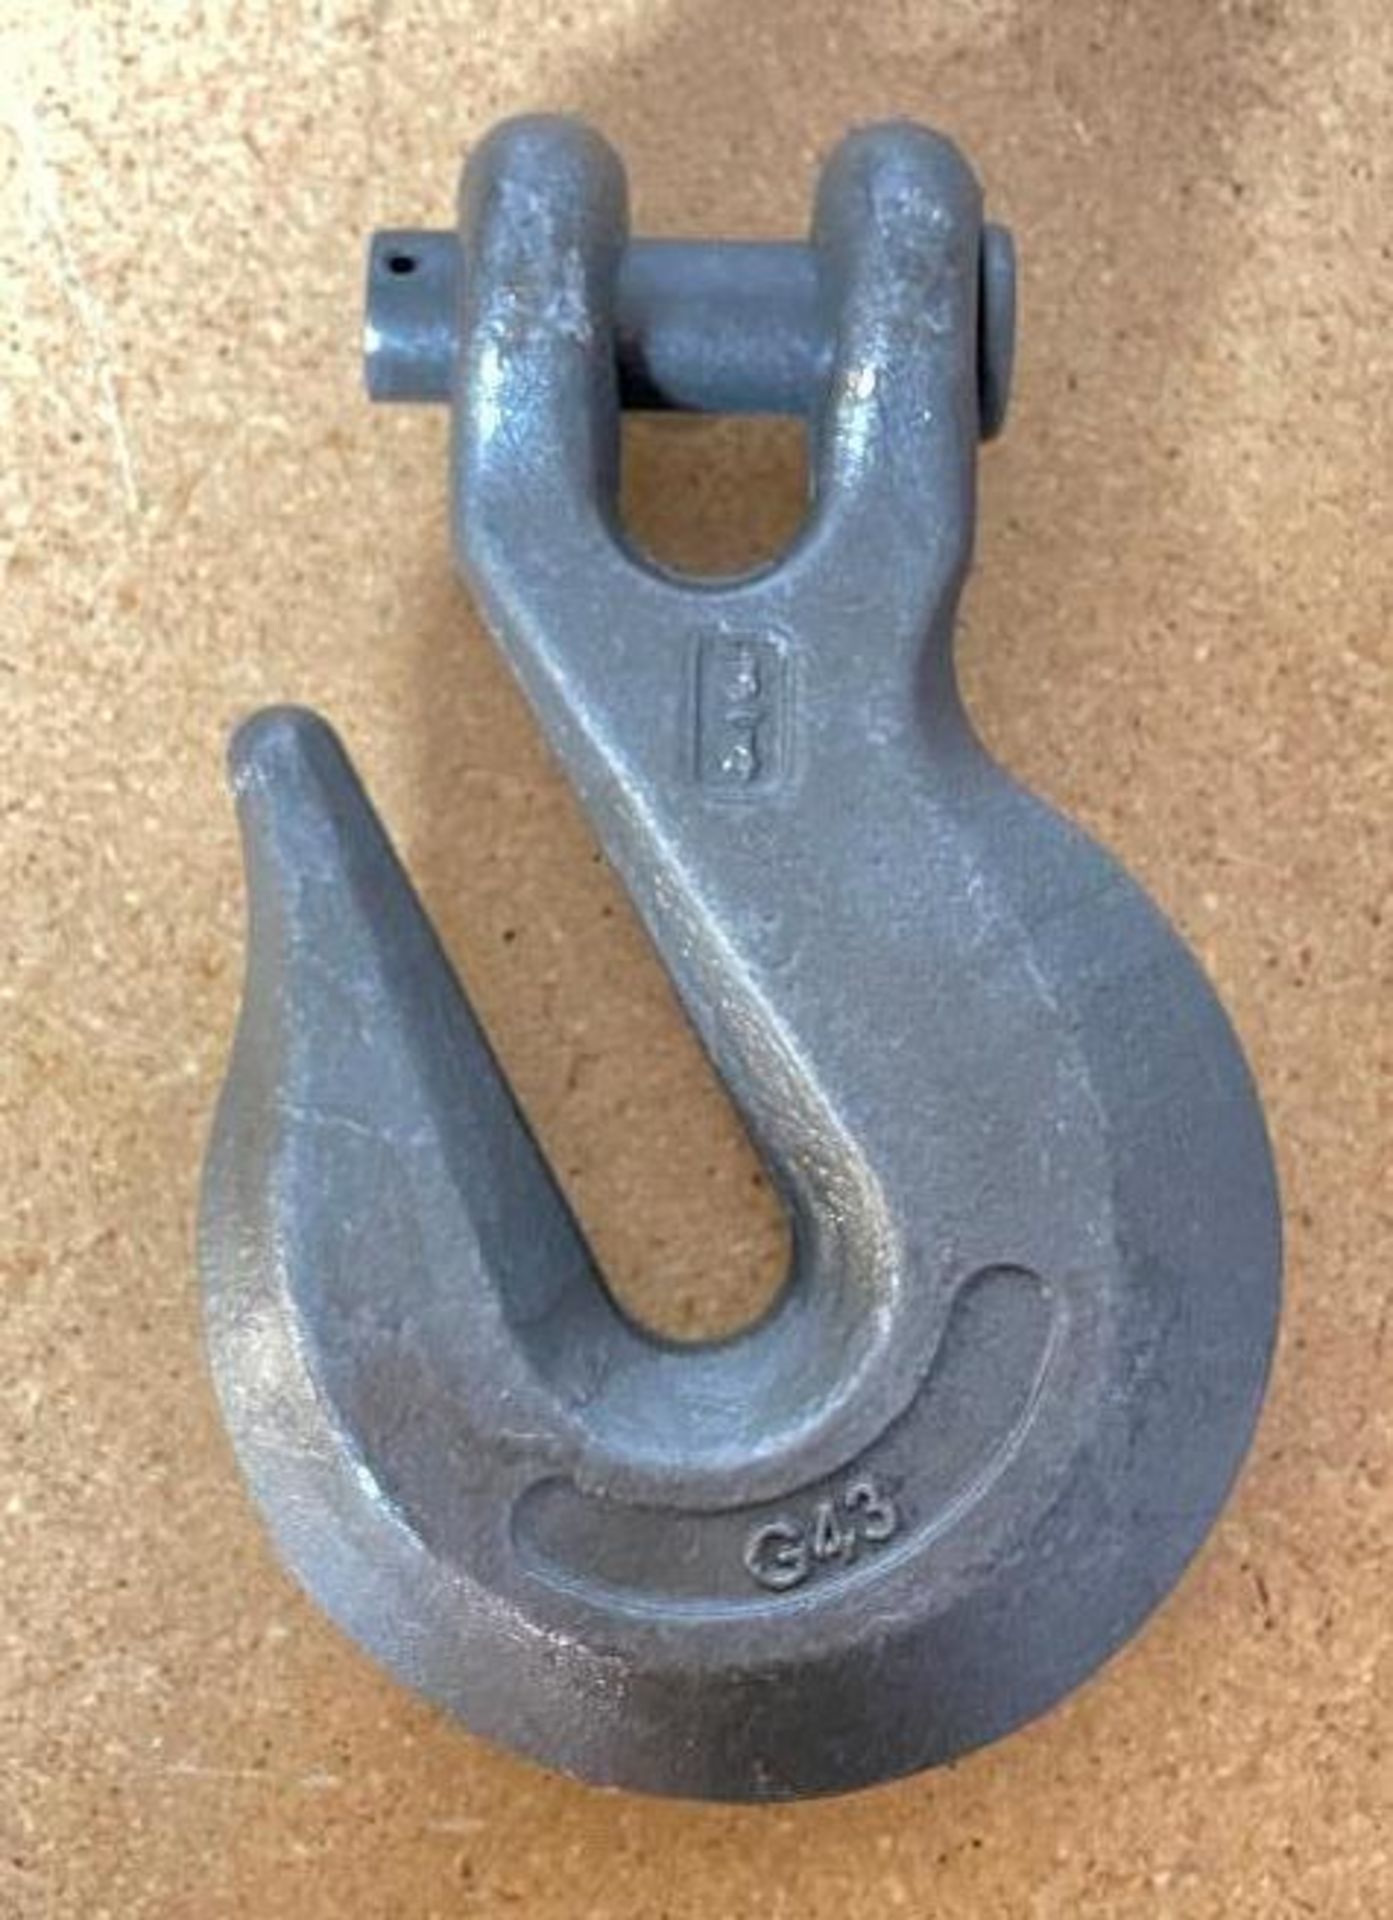 DESCRIPTION: (24) 3/4" G43 FORGED STEEL CLEVIS GRAB HOOK FOR LOAD BINDING BRAND/MODEL: LACLEDE CHAIN